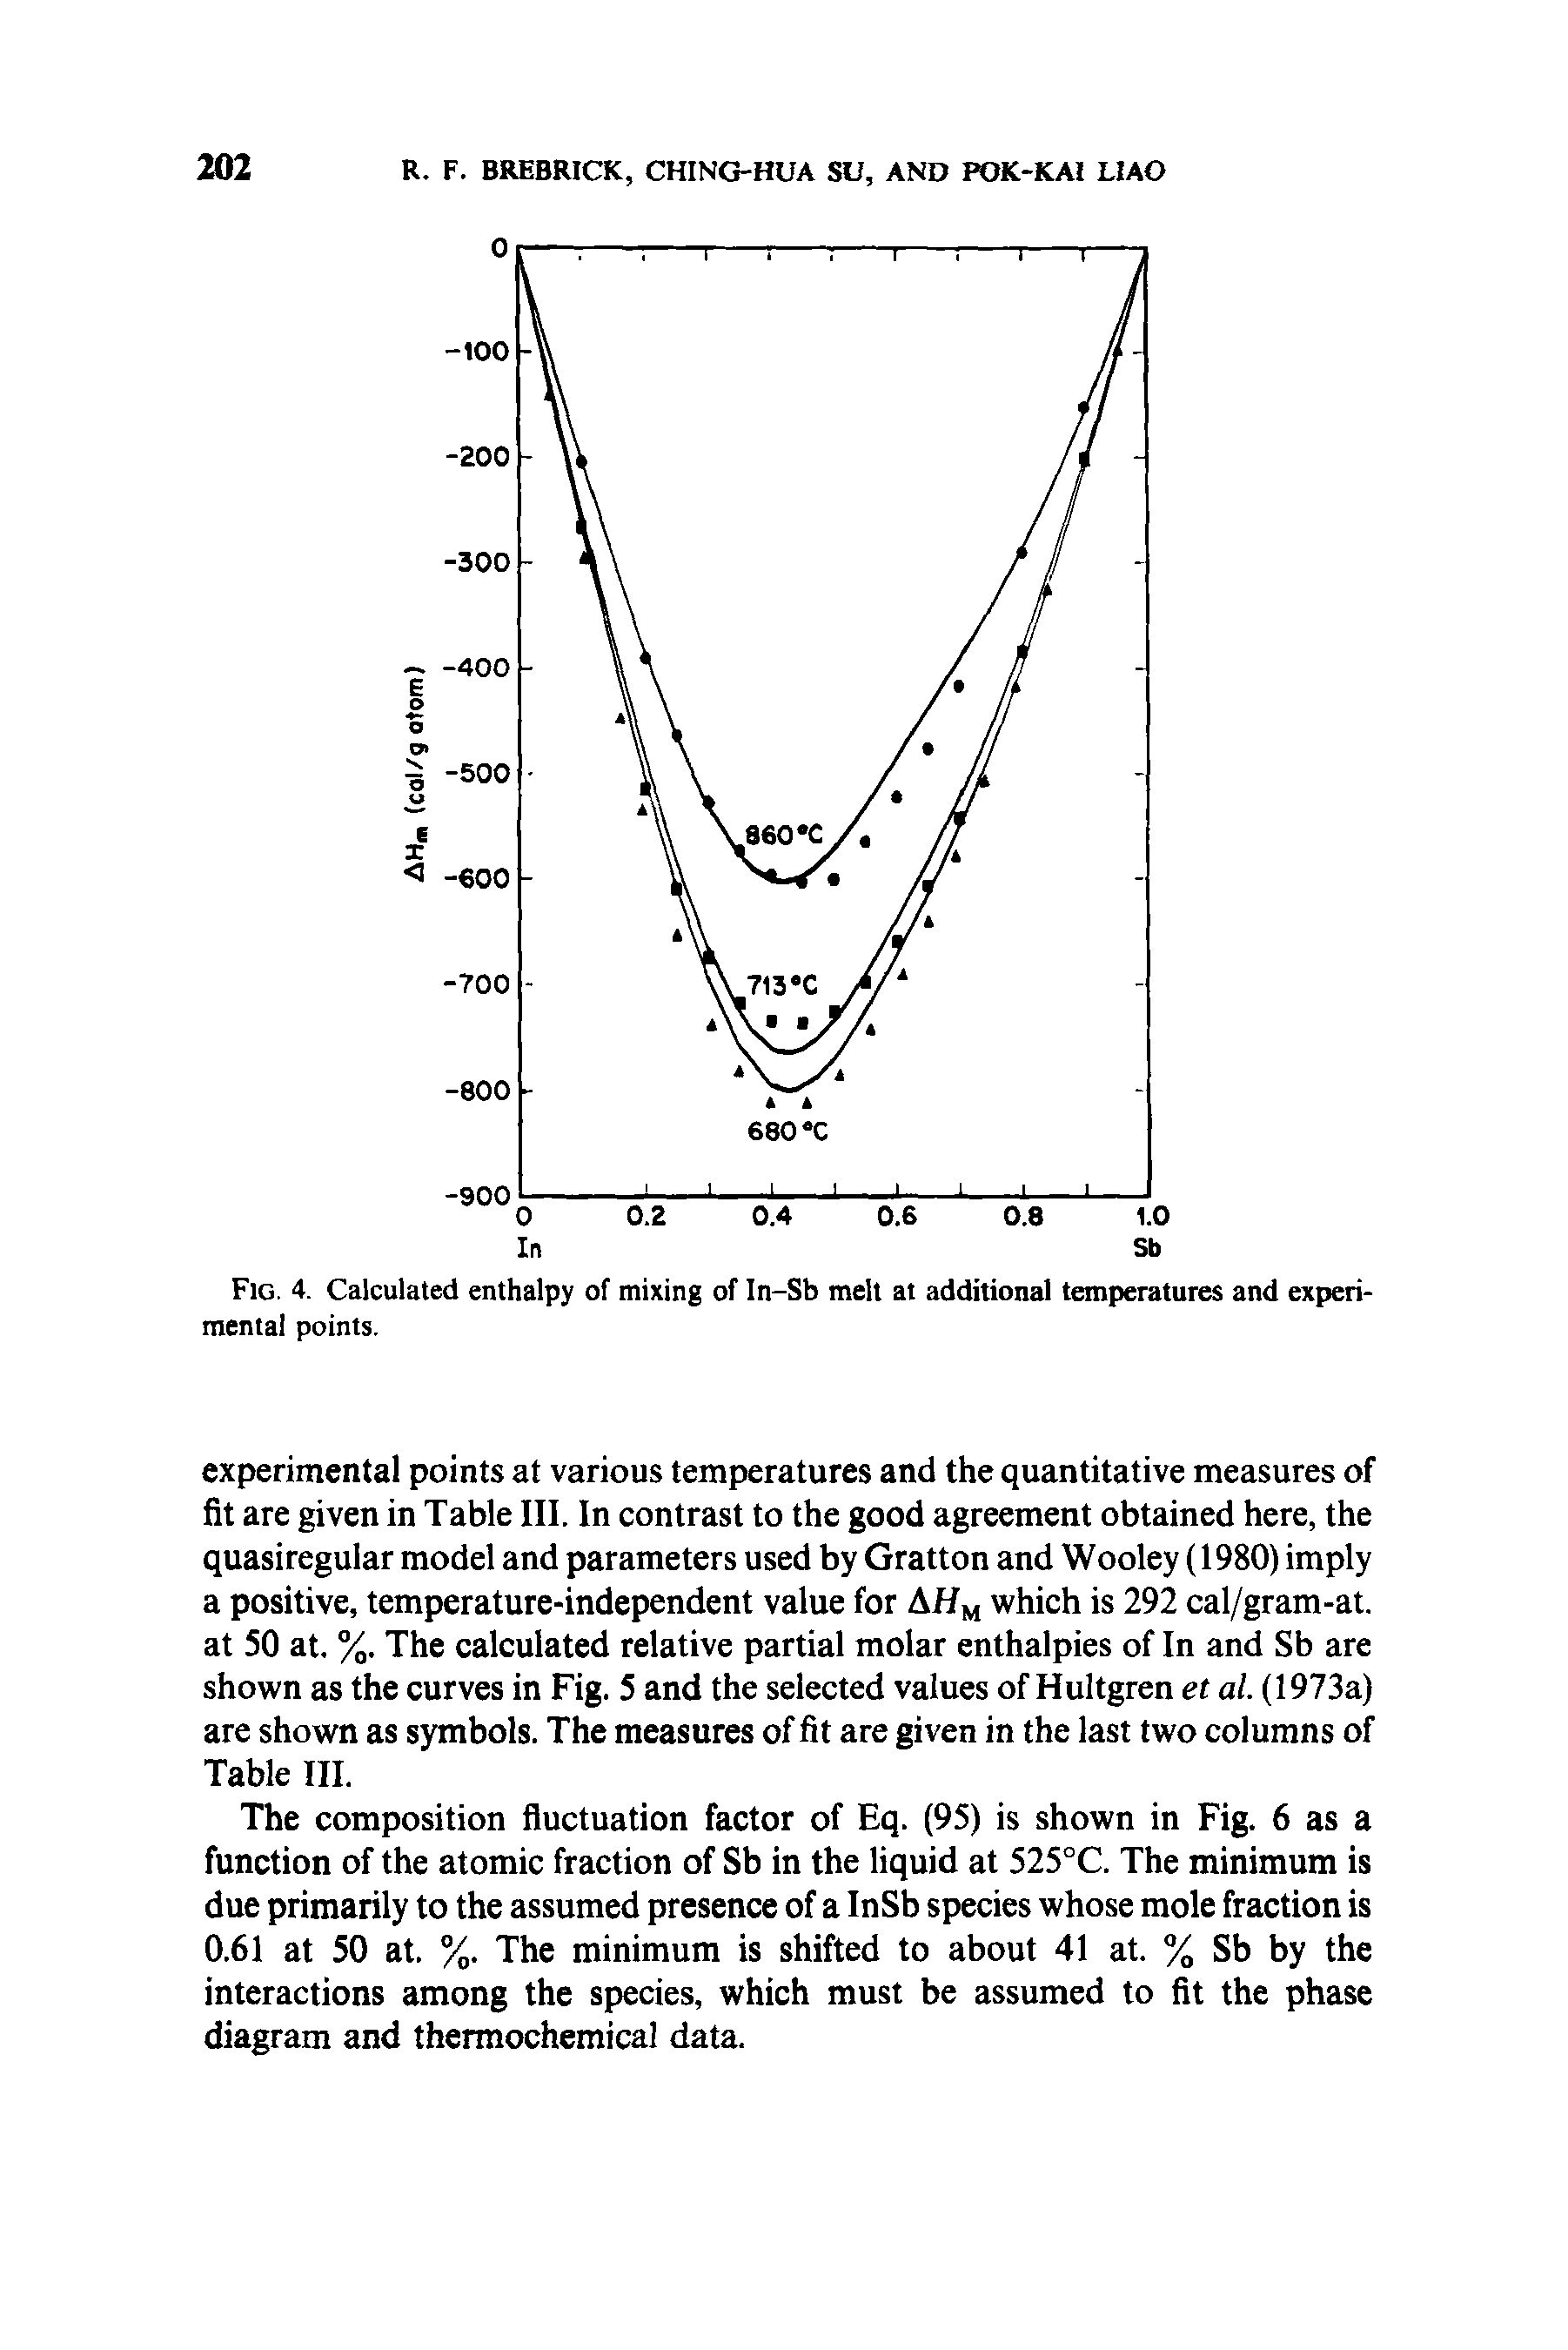 Fig. 4. Calculated enthalpy of mixing of In-Sb melt at additional temperatures and experimental points.